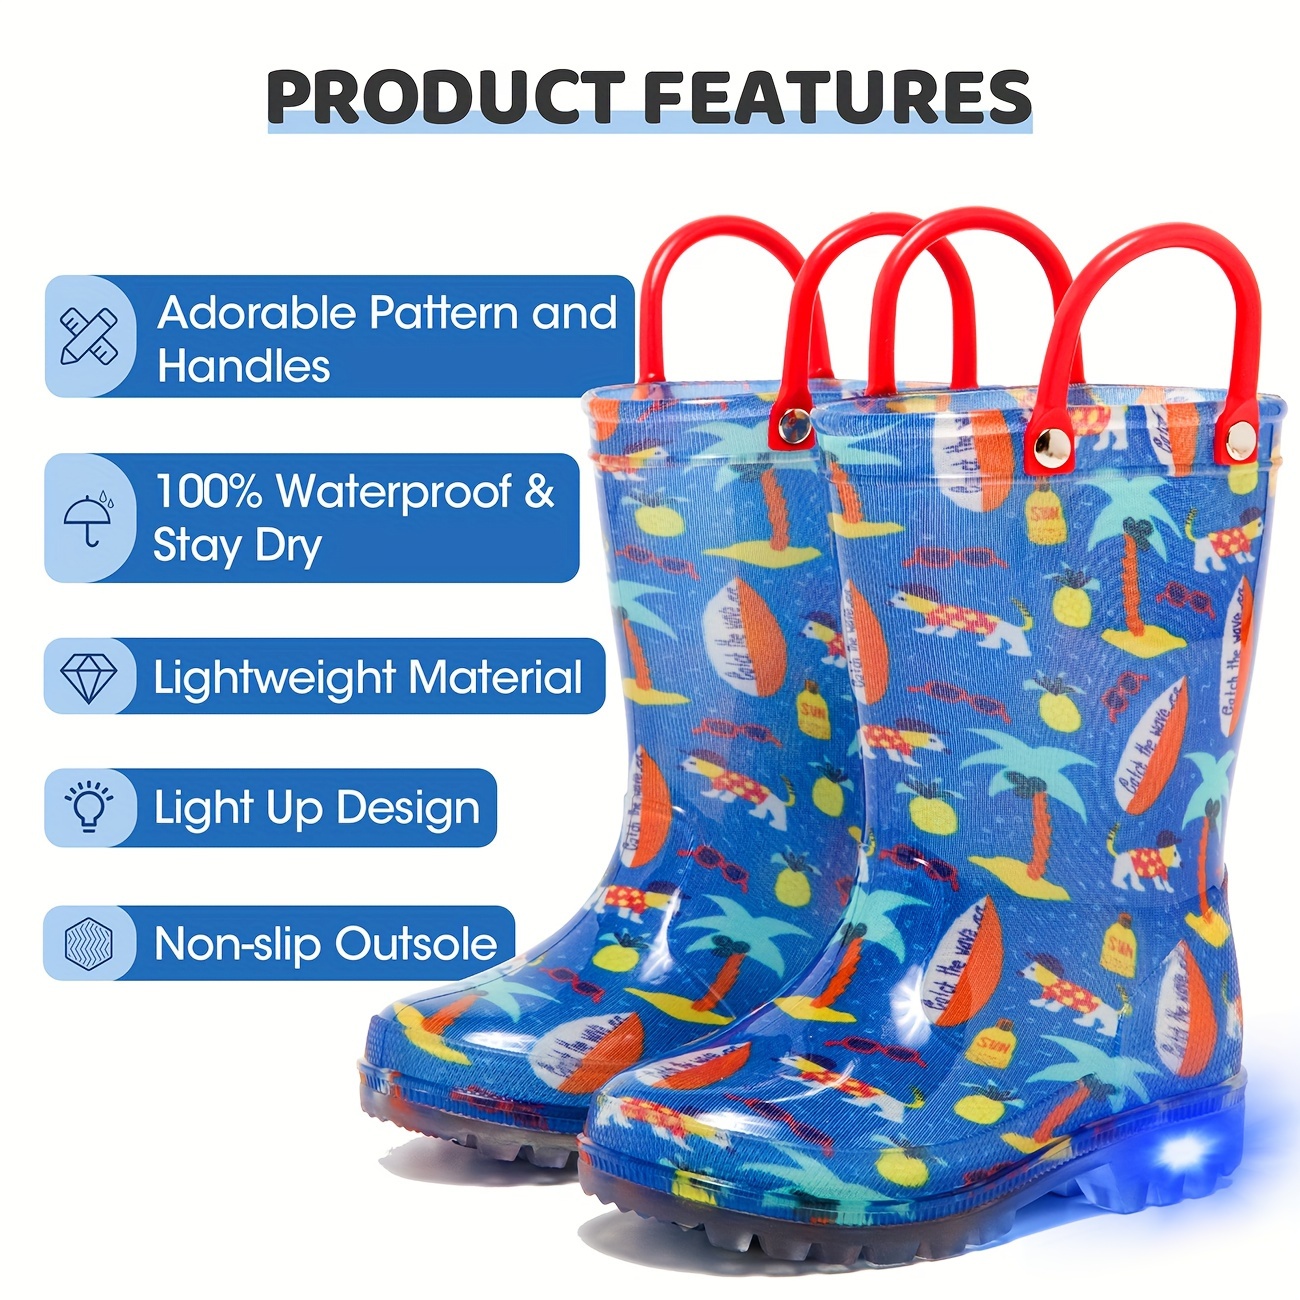 Boys and Girls Casual Cartoon Rain Boots with Astronaut and Bunny Print, Easter/rabbit/bunny Non-Slip Waterproof Drawstring Rubber Boots for